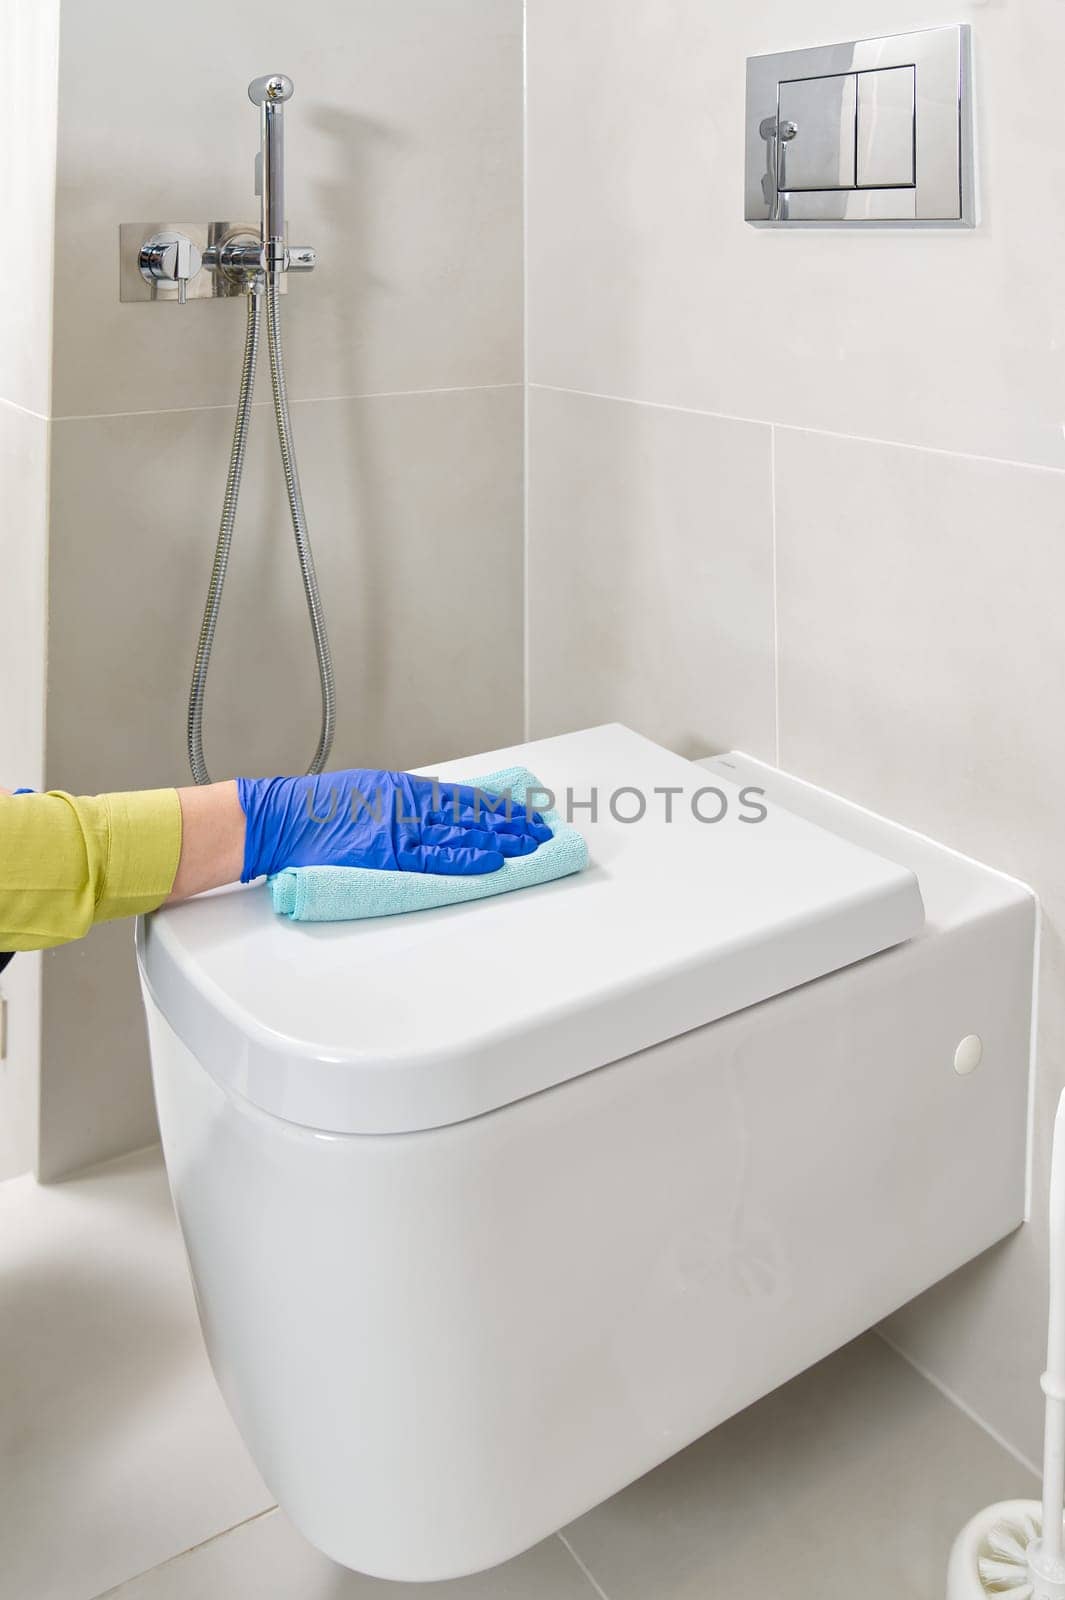 Wall mounted toilet cleaning. hotel maid cleans toilet with a scrub brush. woman household service by PhotoTime